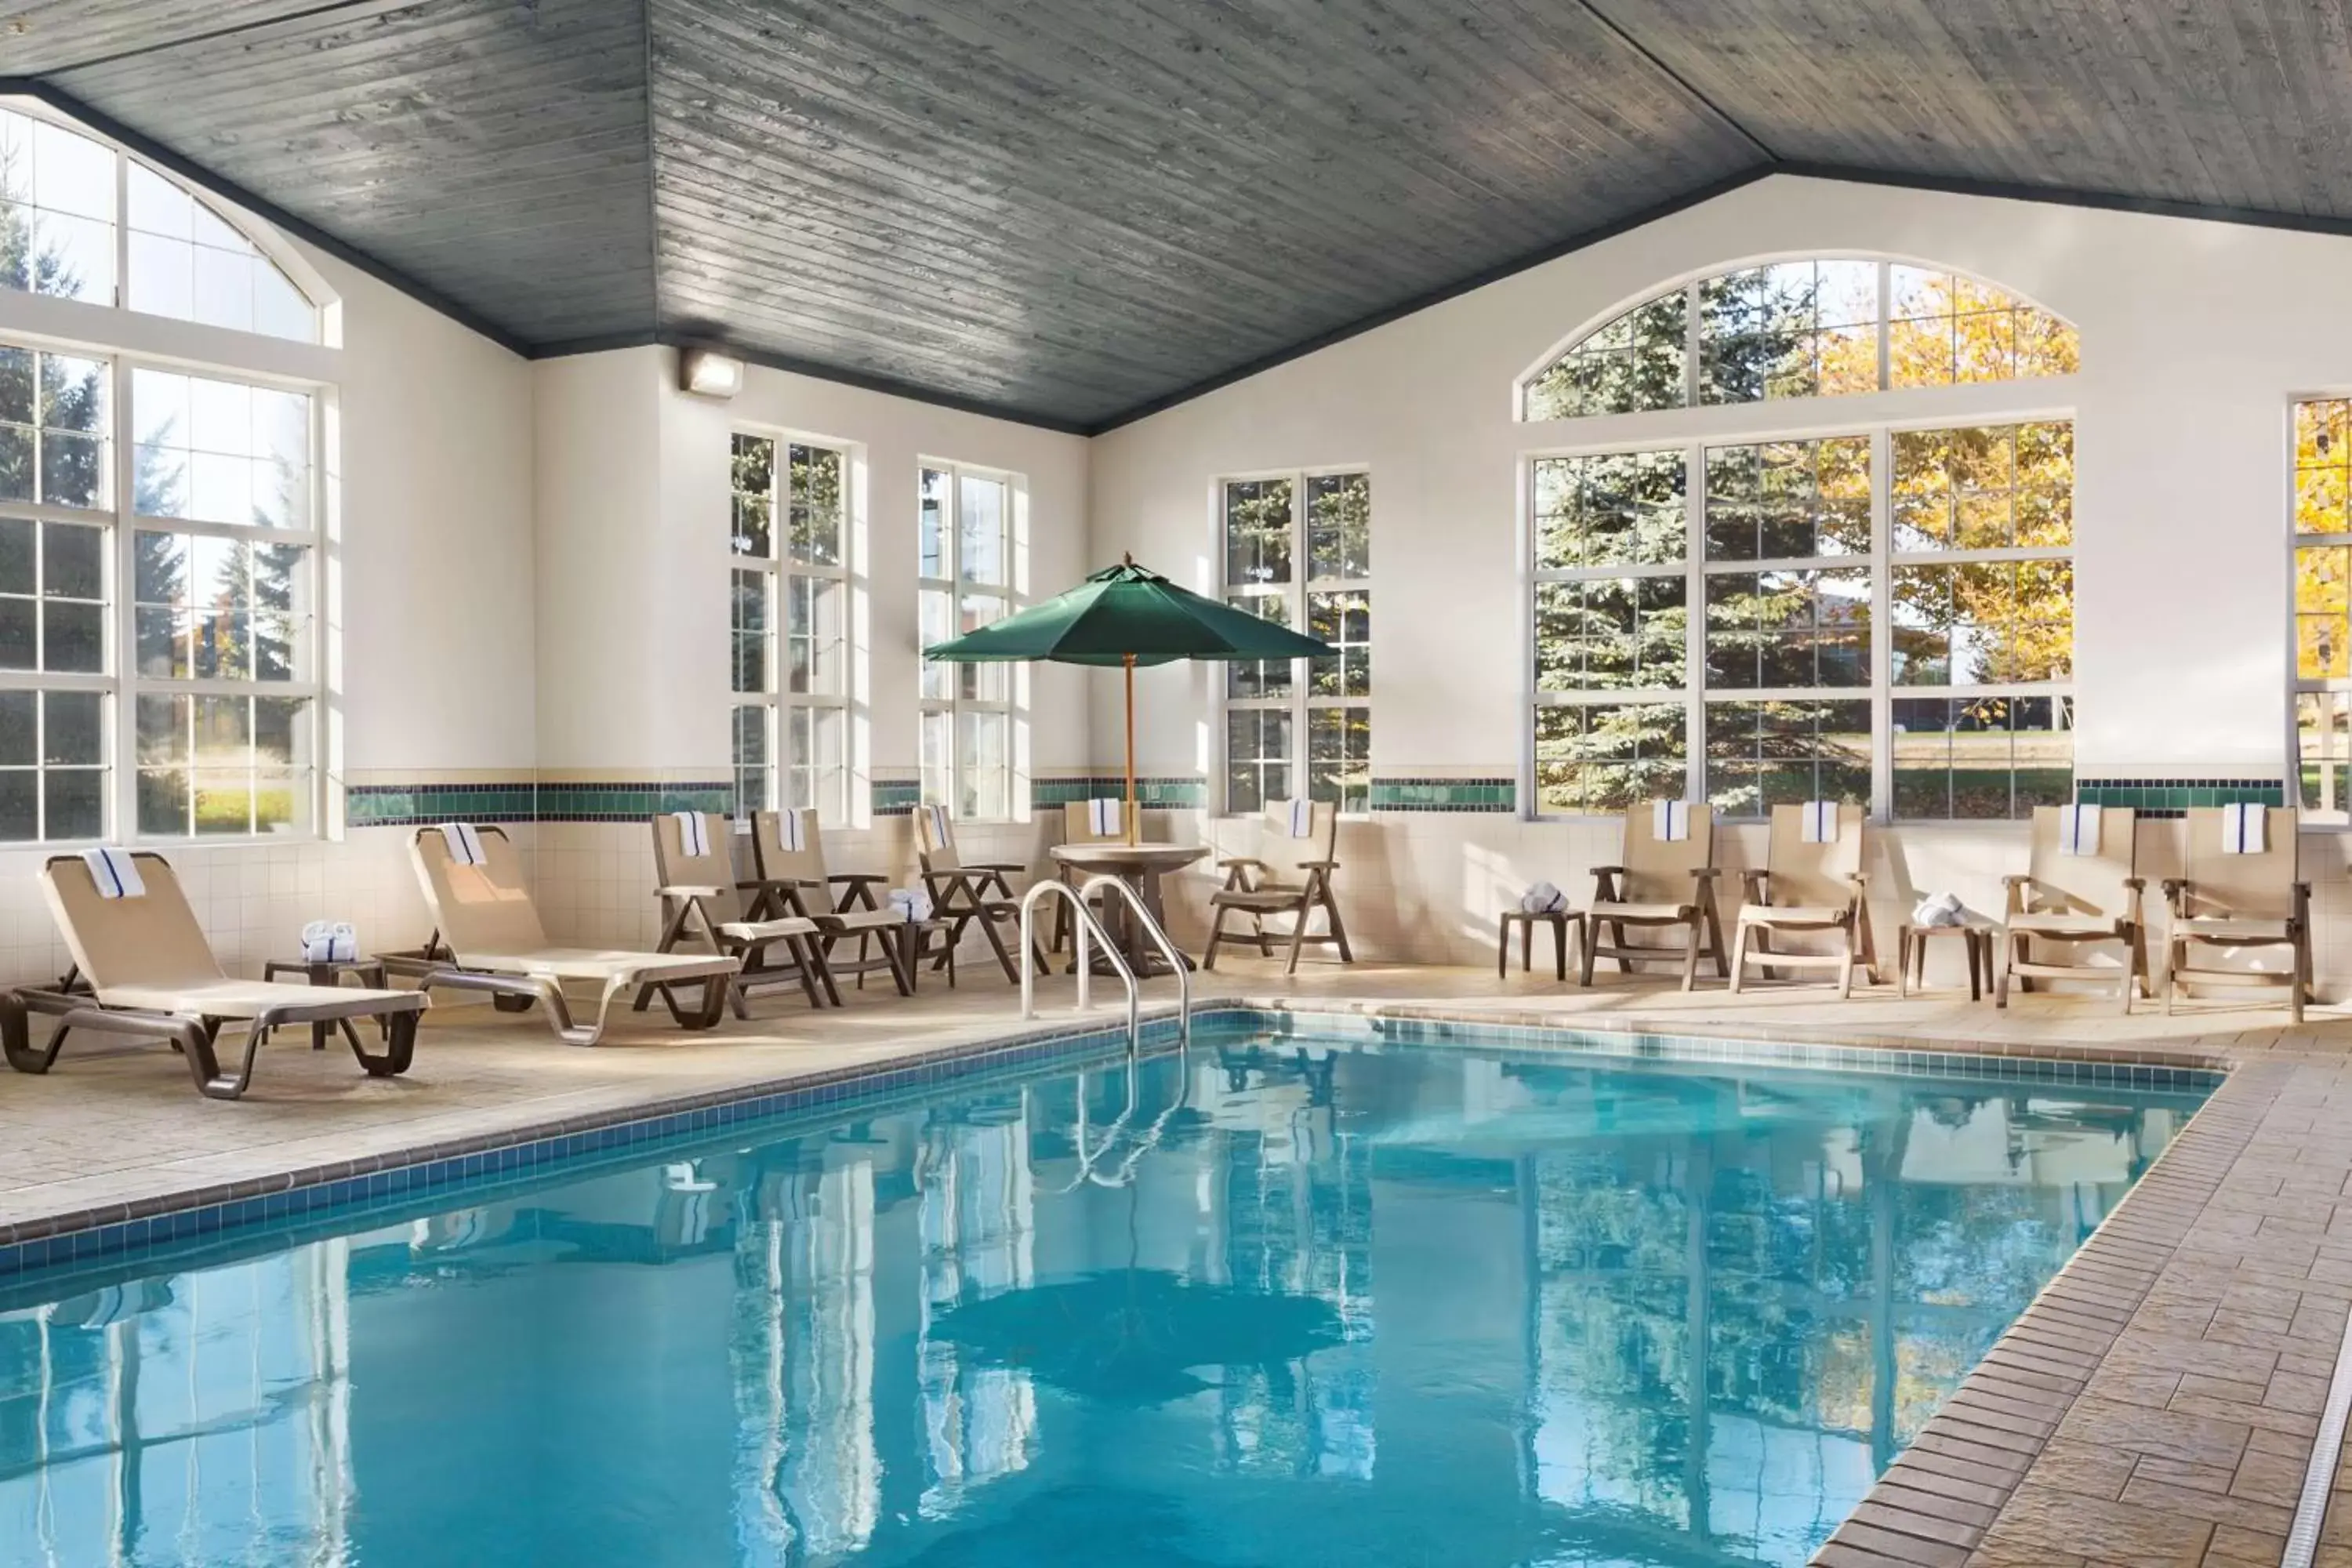 On site, Swimming Pool in Country Inn & Suites by Radisson, Eagan, MN